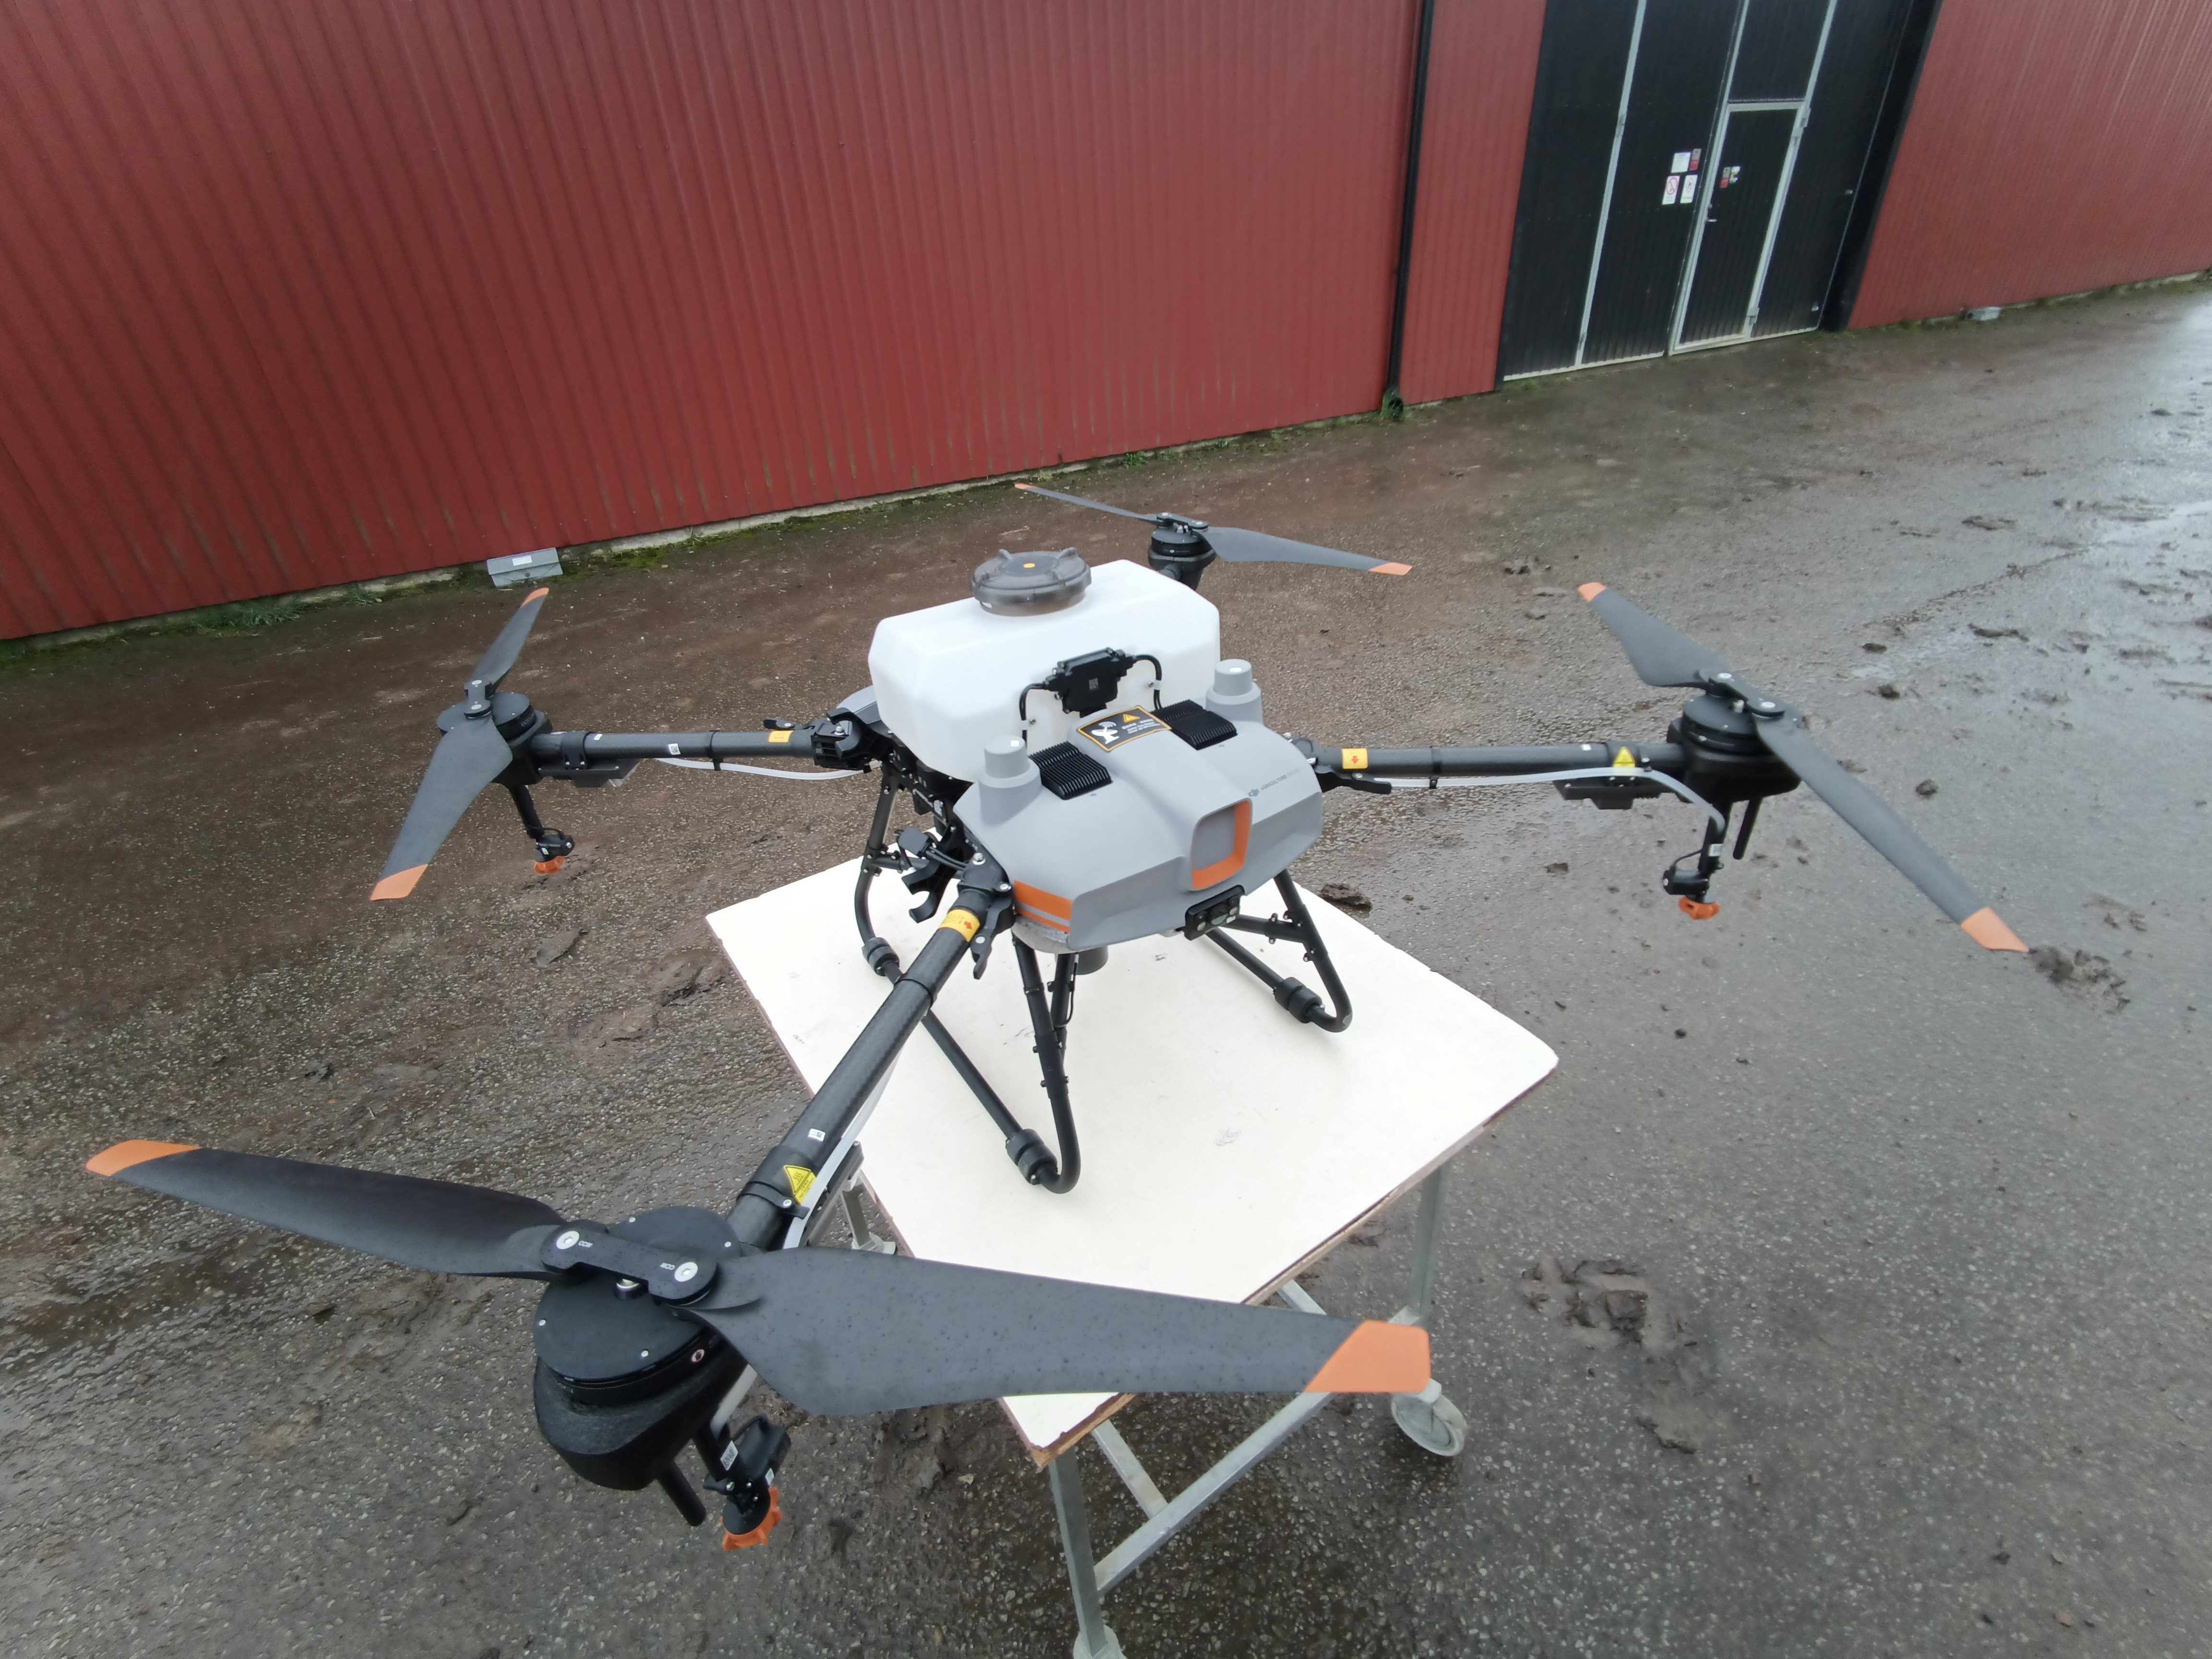 A photo of a drone sitting on a little cart in front of a red building. The drone has four propellers on arms reaching away from the body of the drone where the there is the container that could be filled with fertilizer.